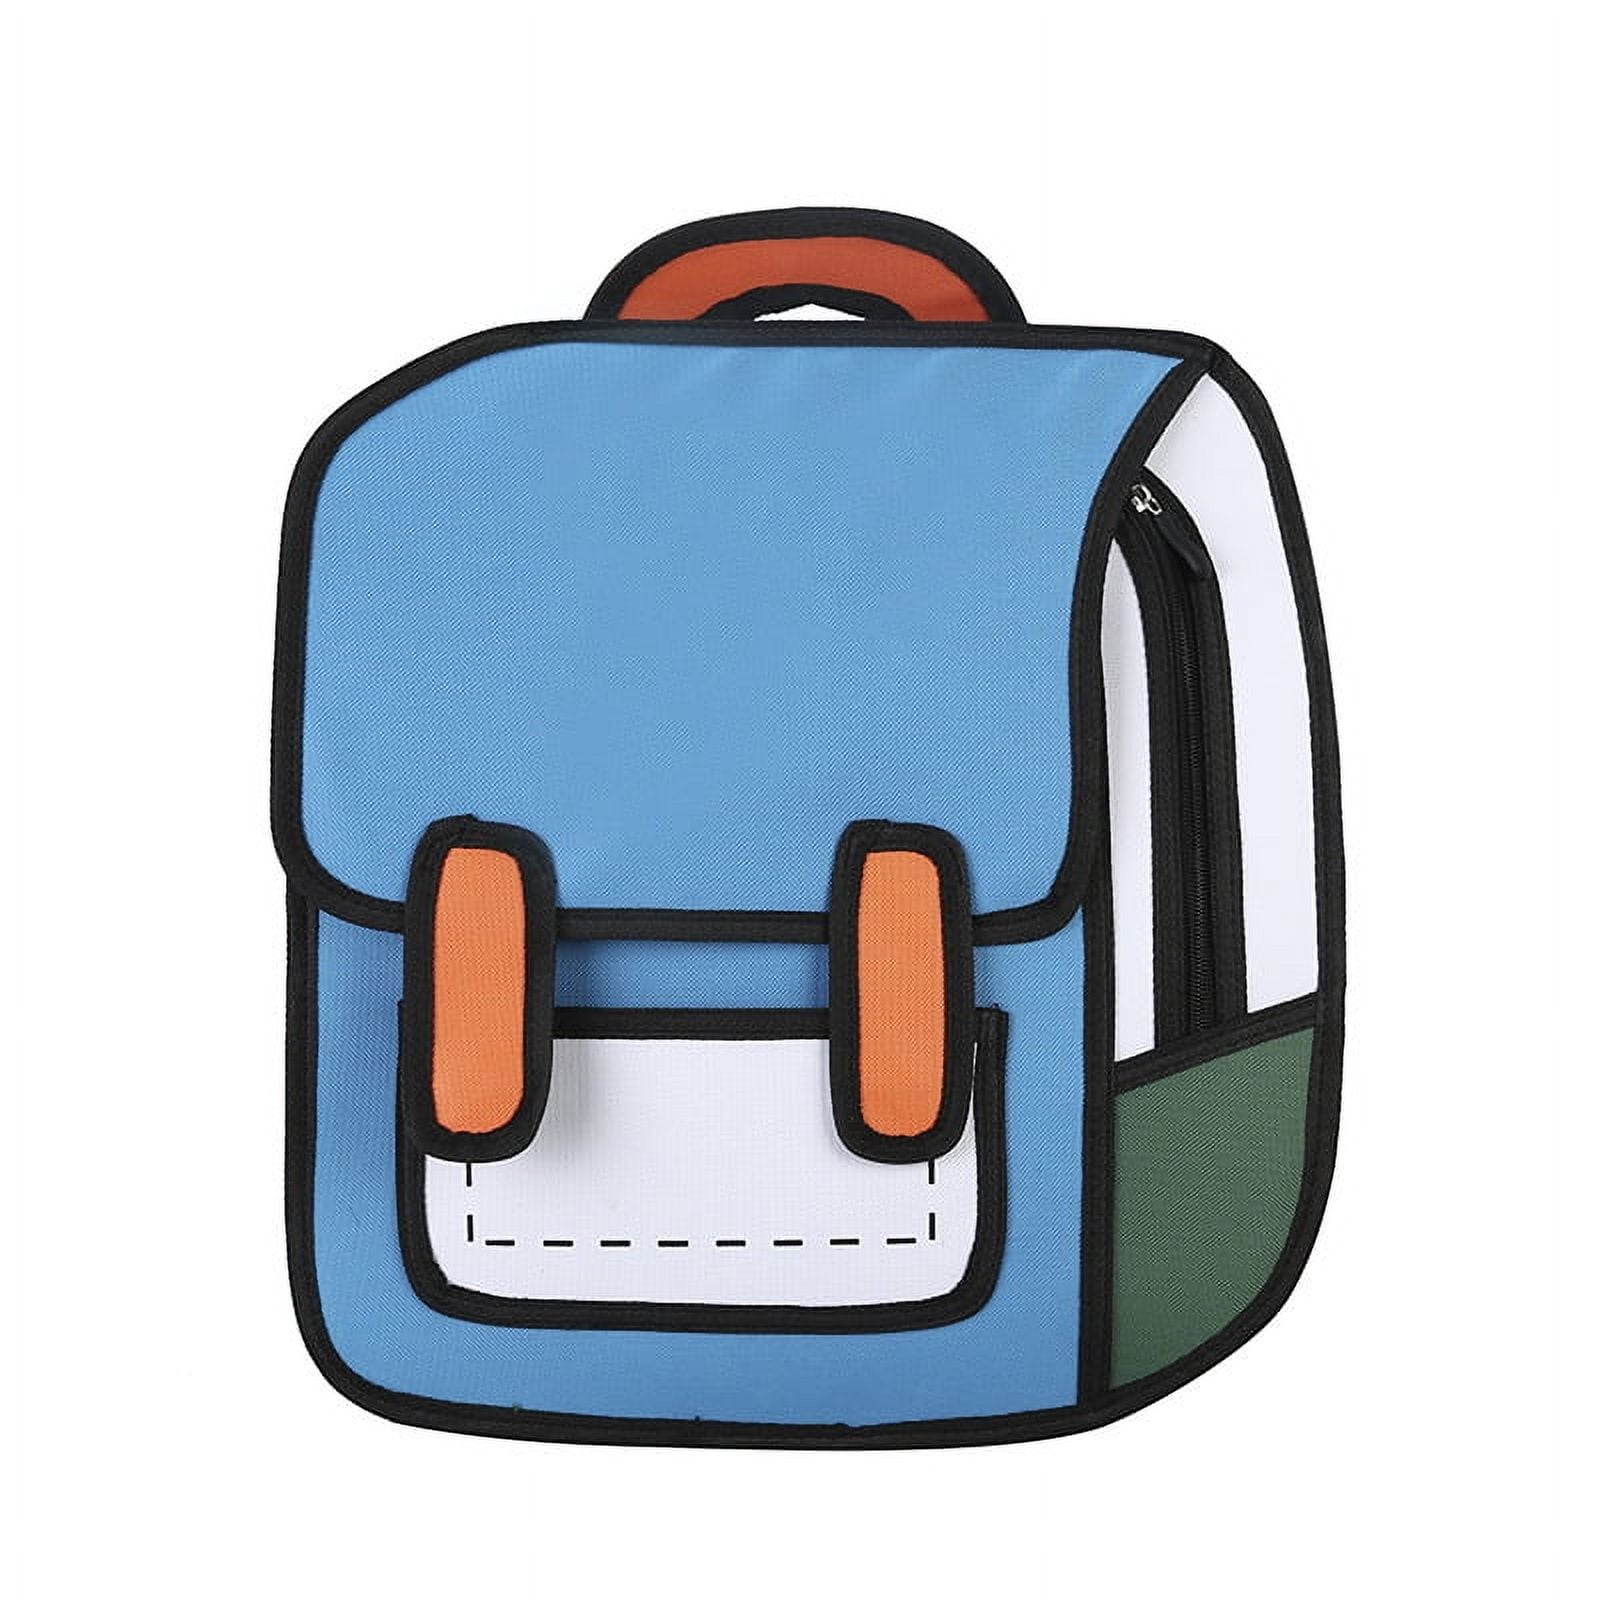 Middle School African American Boy With Backpack Clipart by Teach Simple